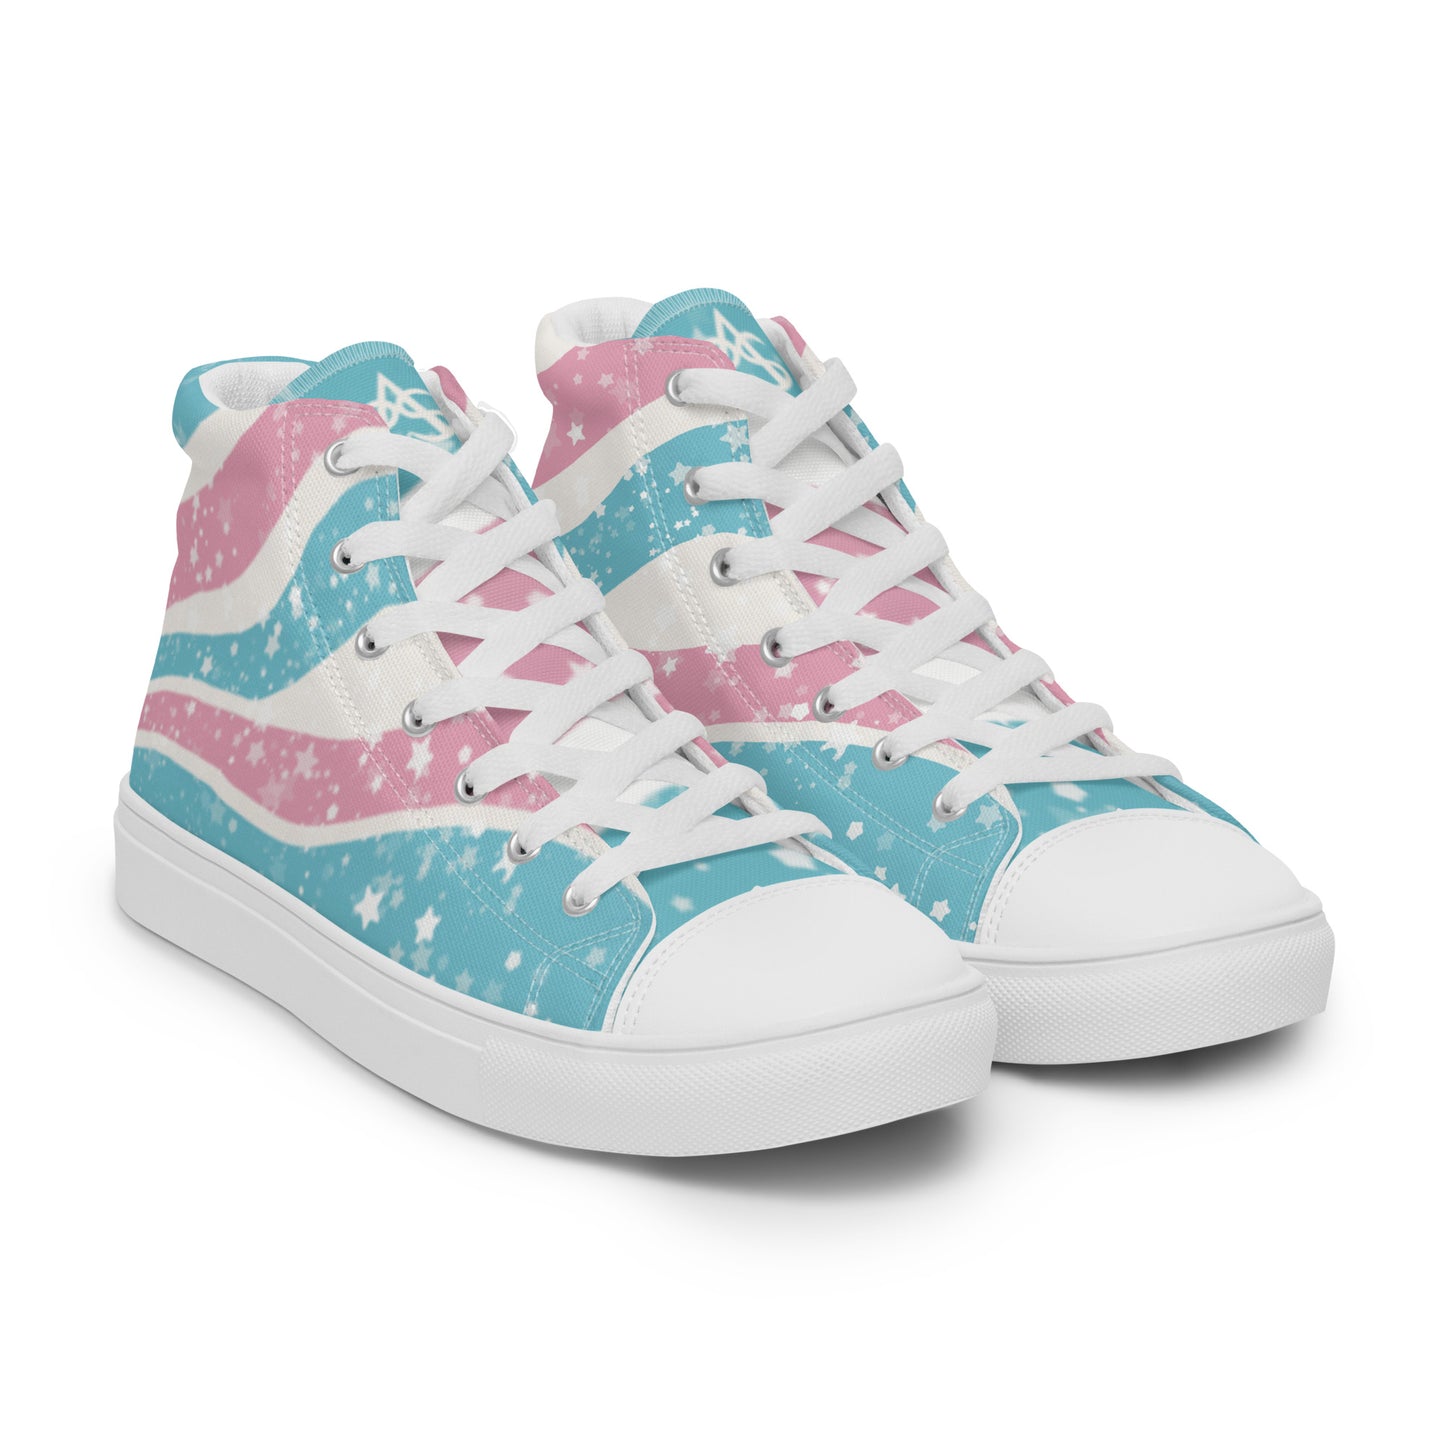 Right front view: A pair of high top shoes have way lines starting from the heel and getting larger towards the laces in pink, white, and blue with white stars all over, white laces, and white details.